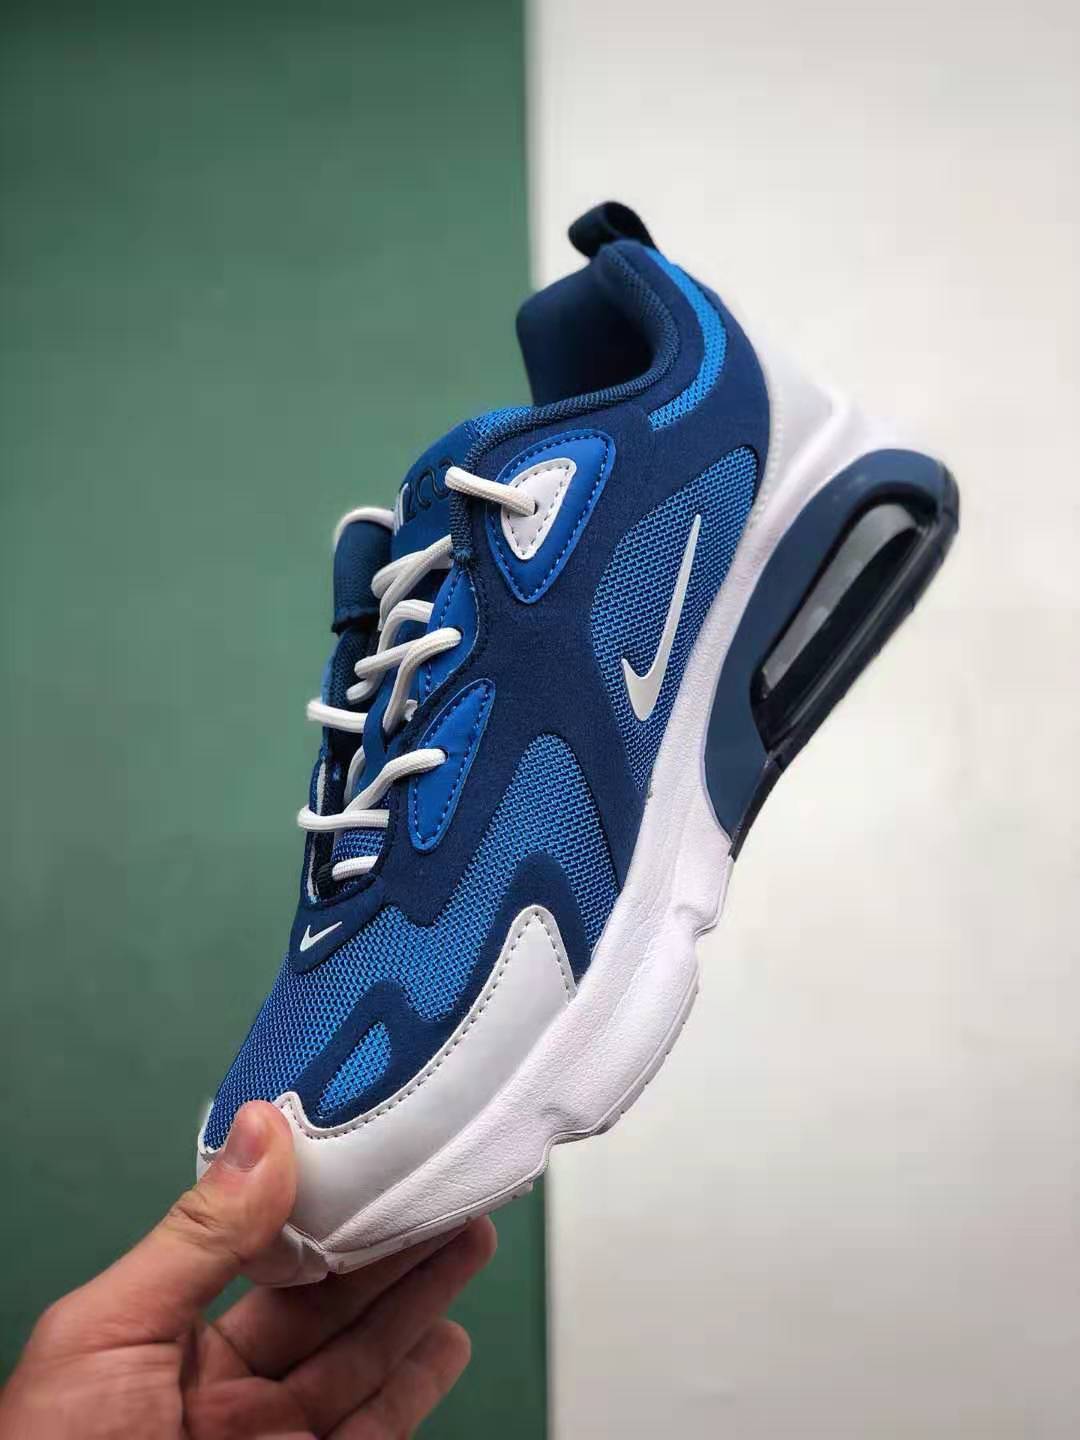 Nike Air Max 200 'Pacific Blue' AQ2568-400 - Stylish and Comfortable Footwear for Men